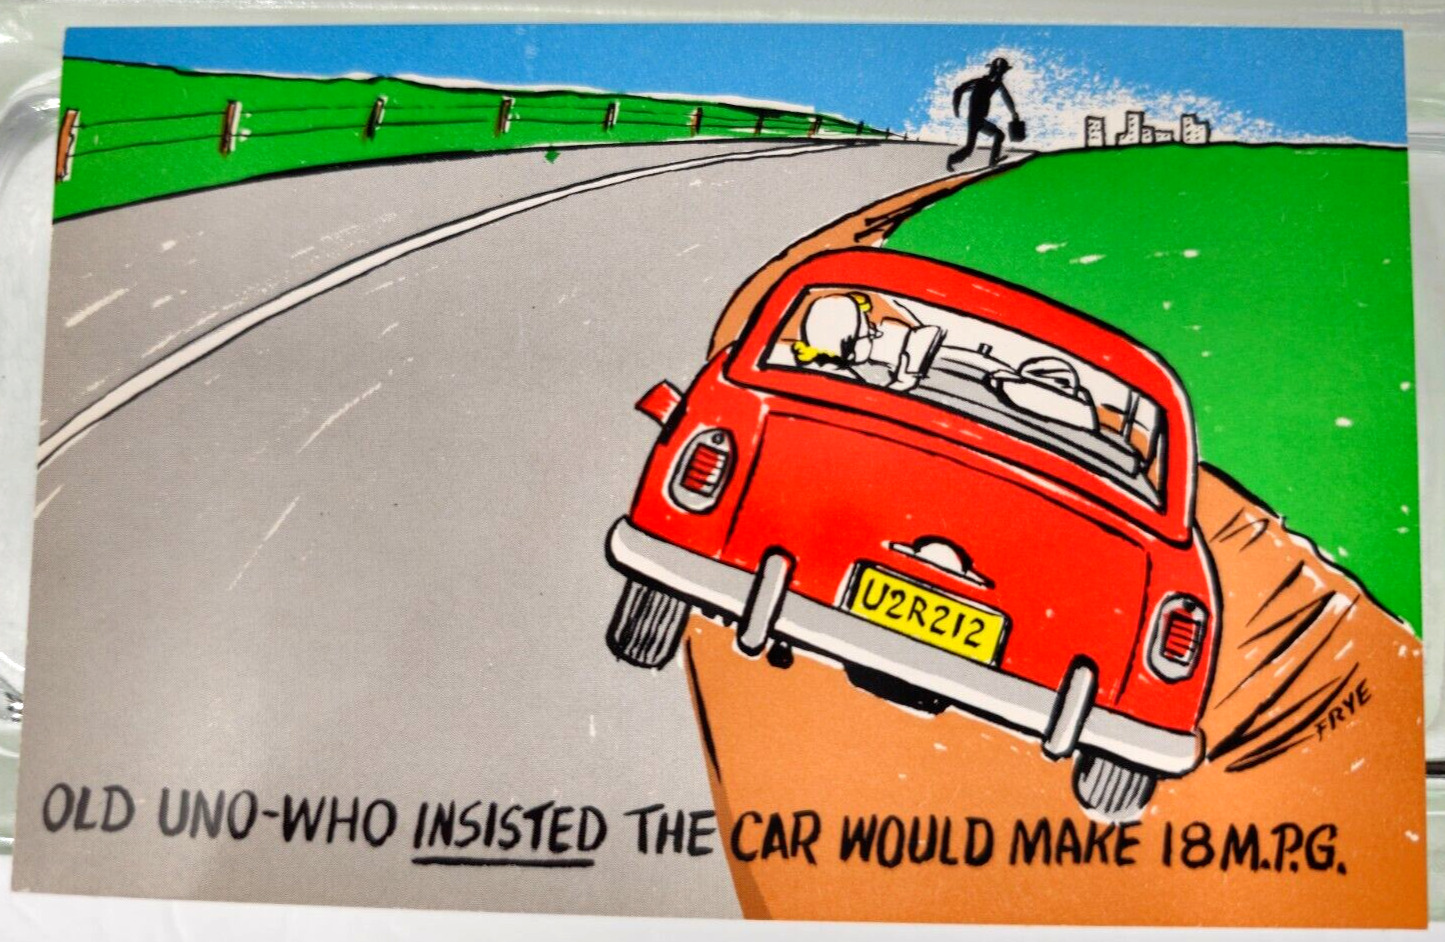 Highway Humor Comic PostCard- Frye & Smith H-417 Insisted the Car Would Get 18